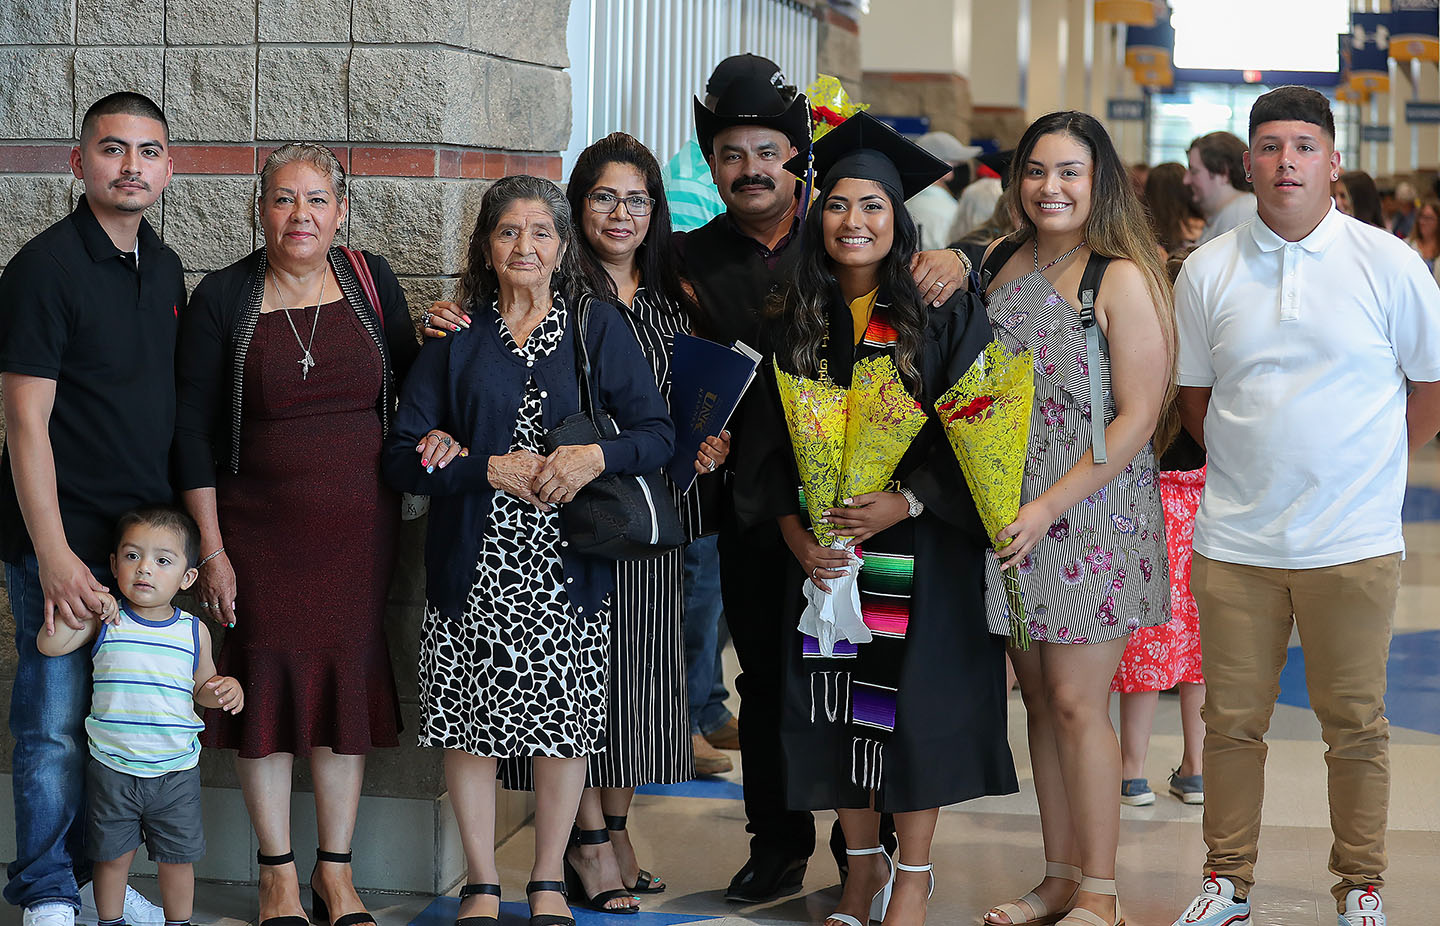 Edna Medina, third from right, poses for a photo with her family following Friday’s summer commencement ceremony at UNK’s Health and Sports Center.